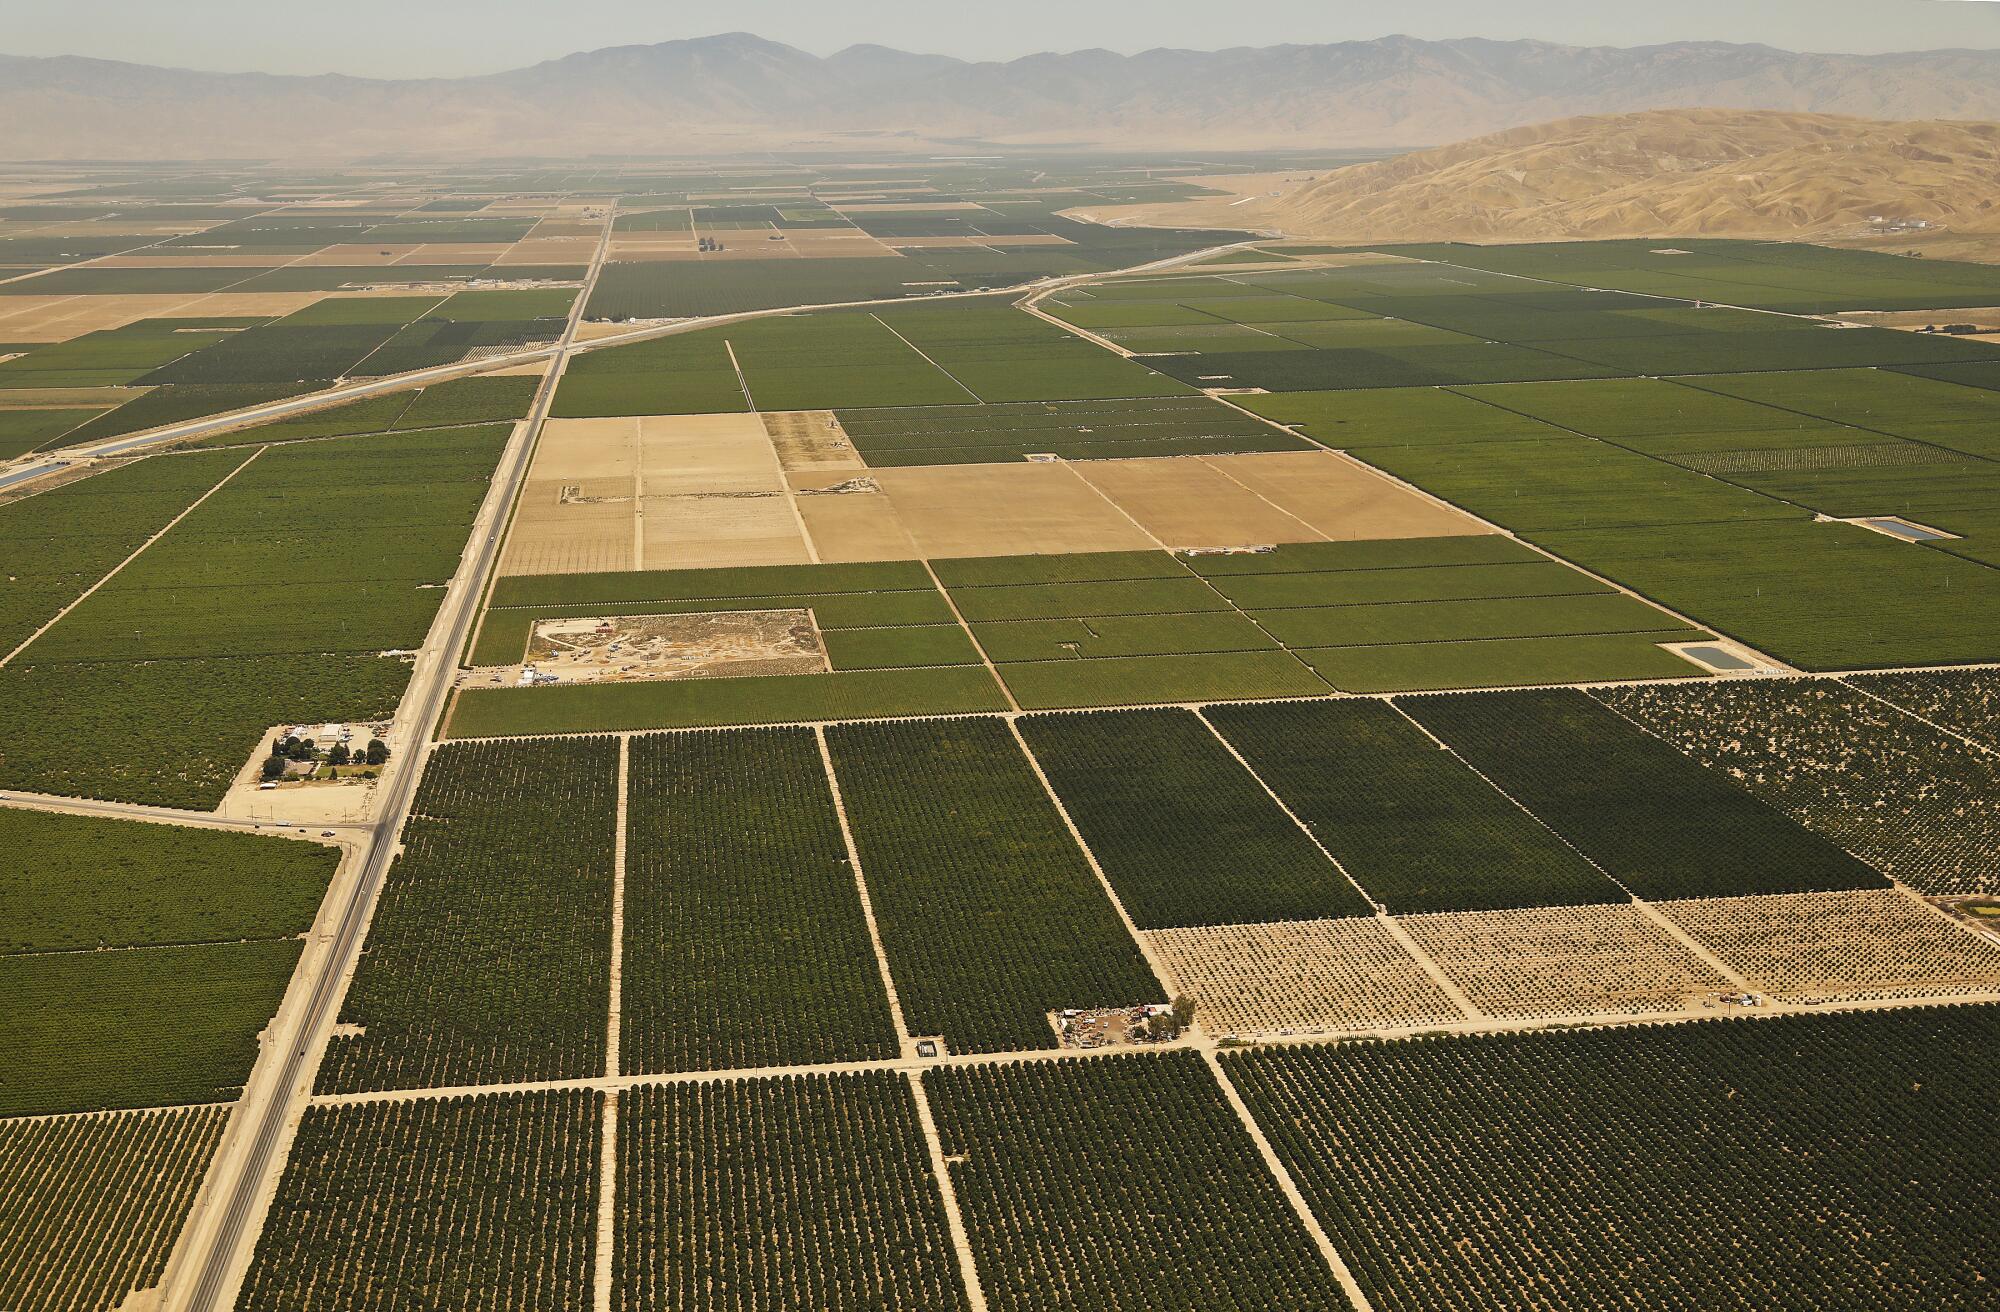 An aerial view of farmland and orchards.